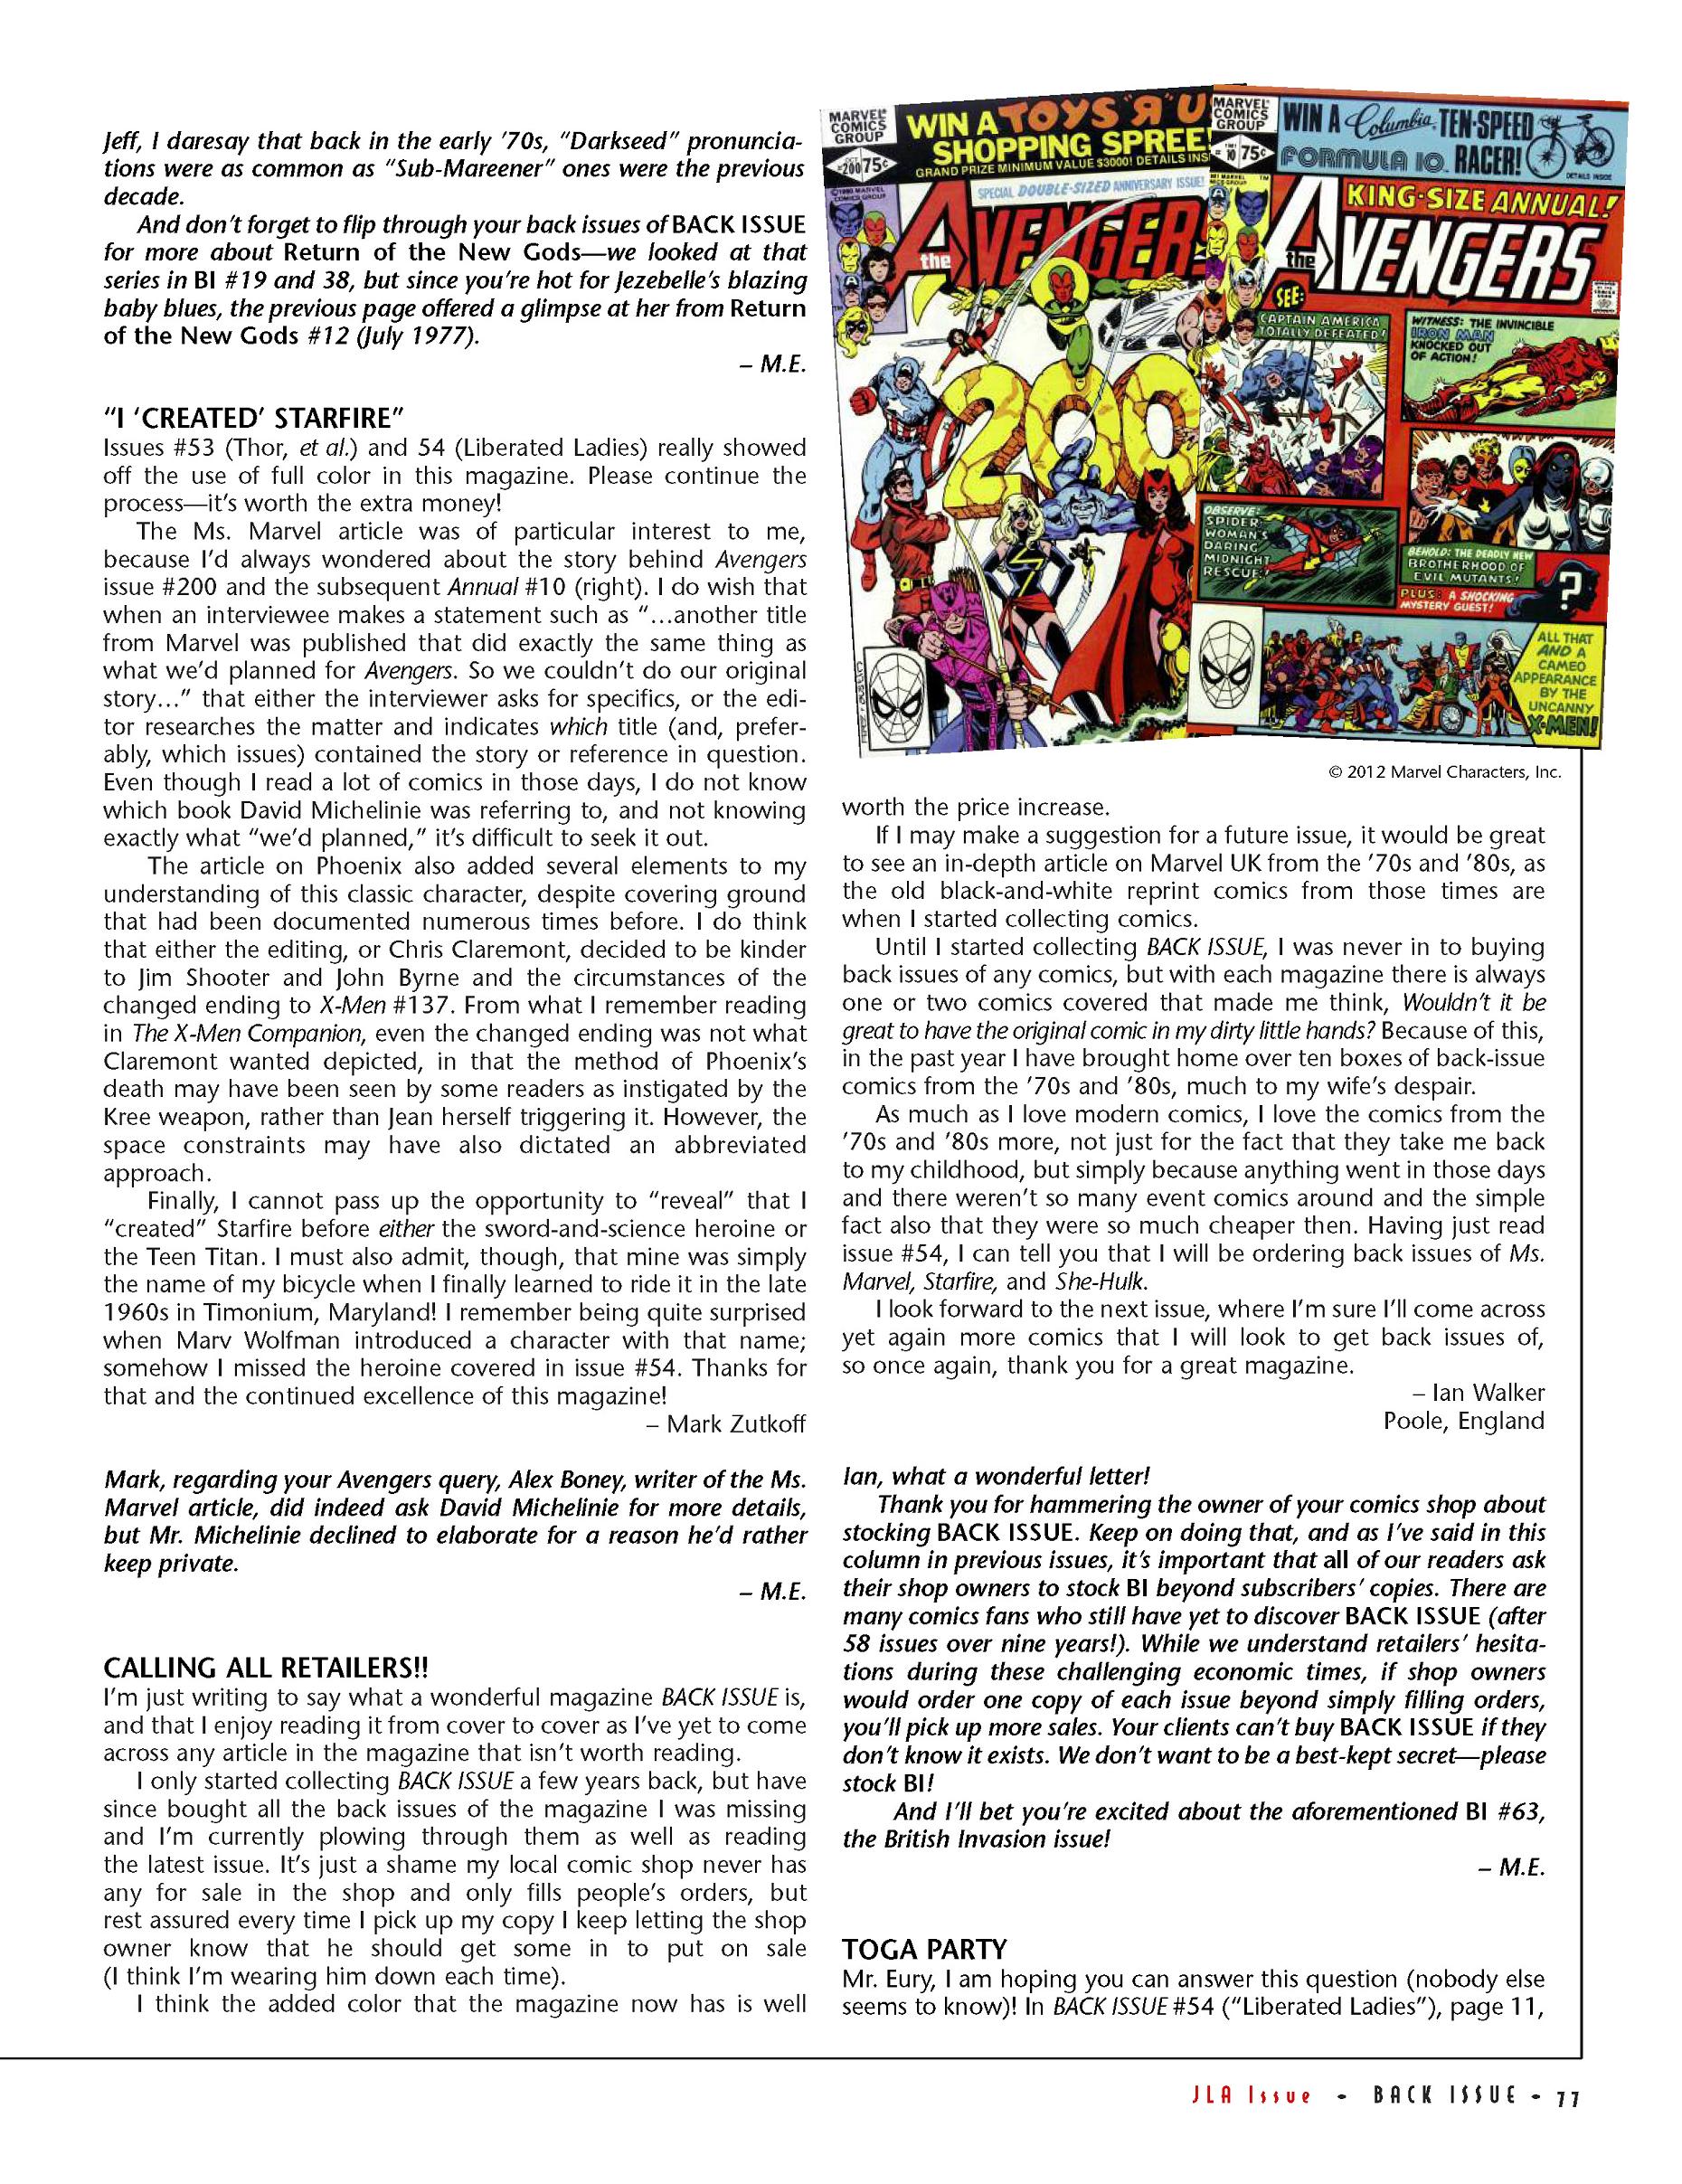 Read online Back Issue comic -  Issue #58 - 77